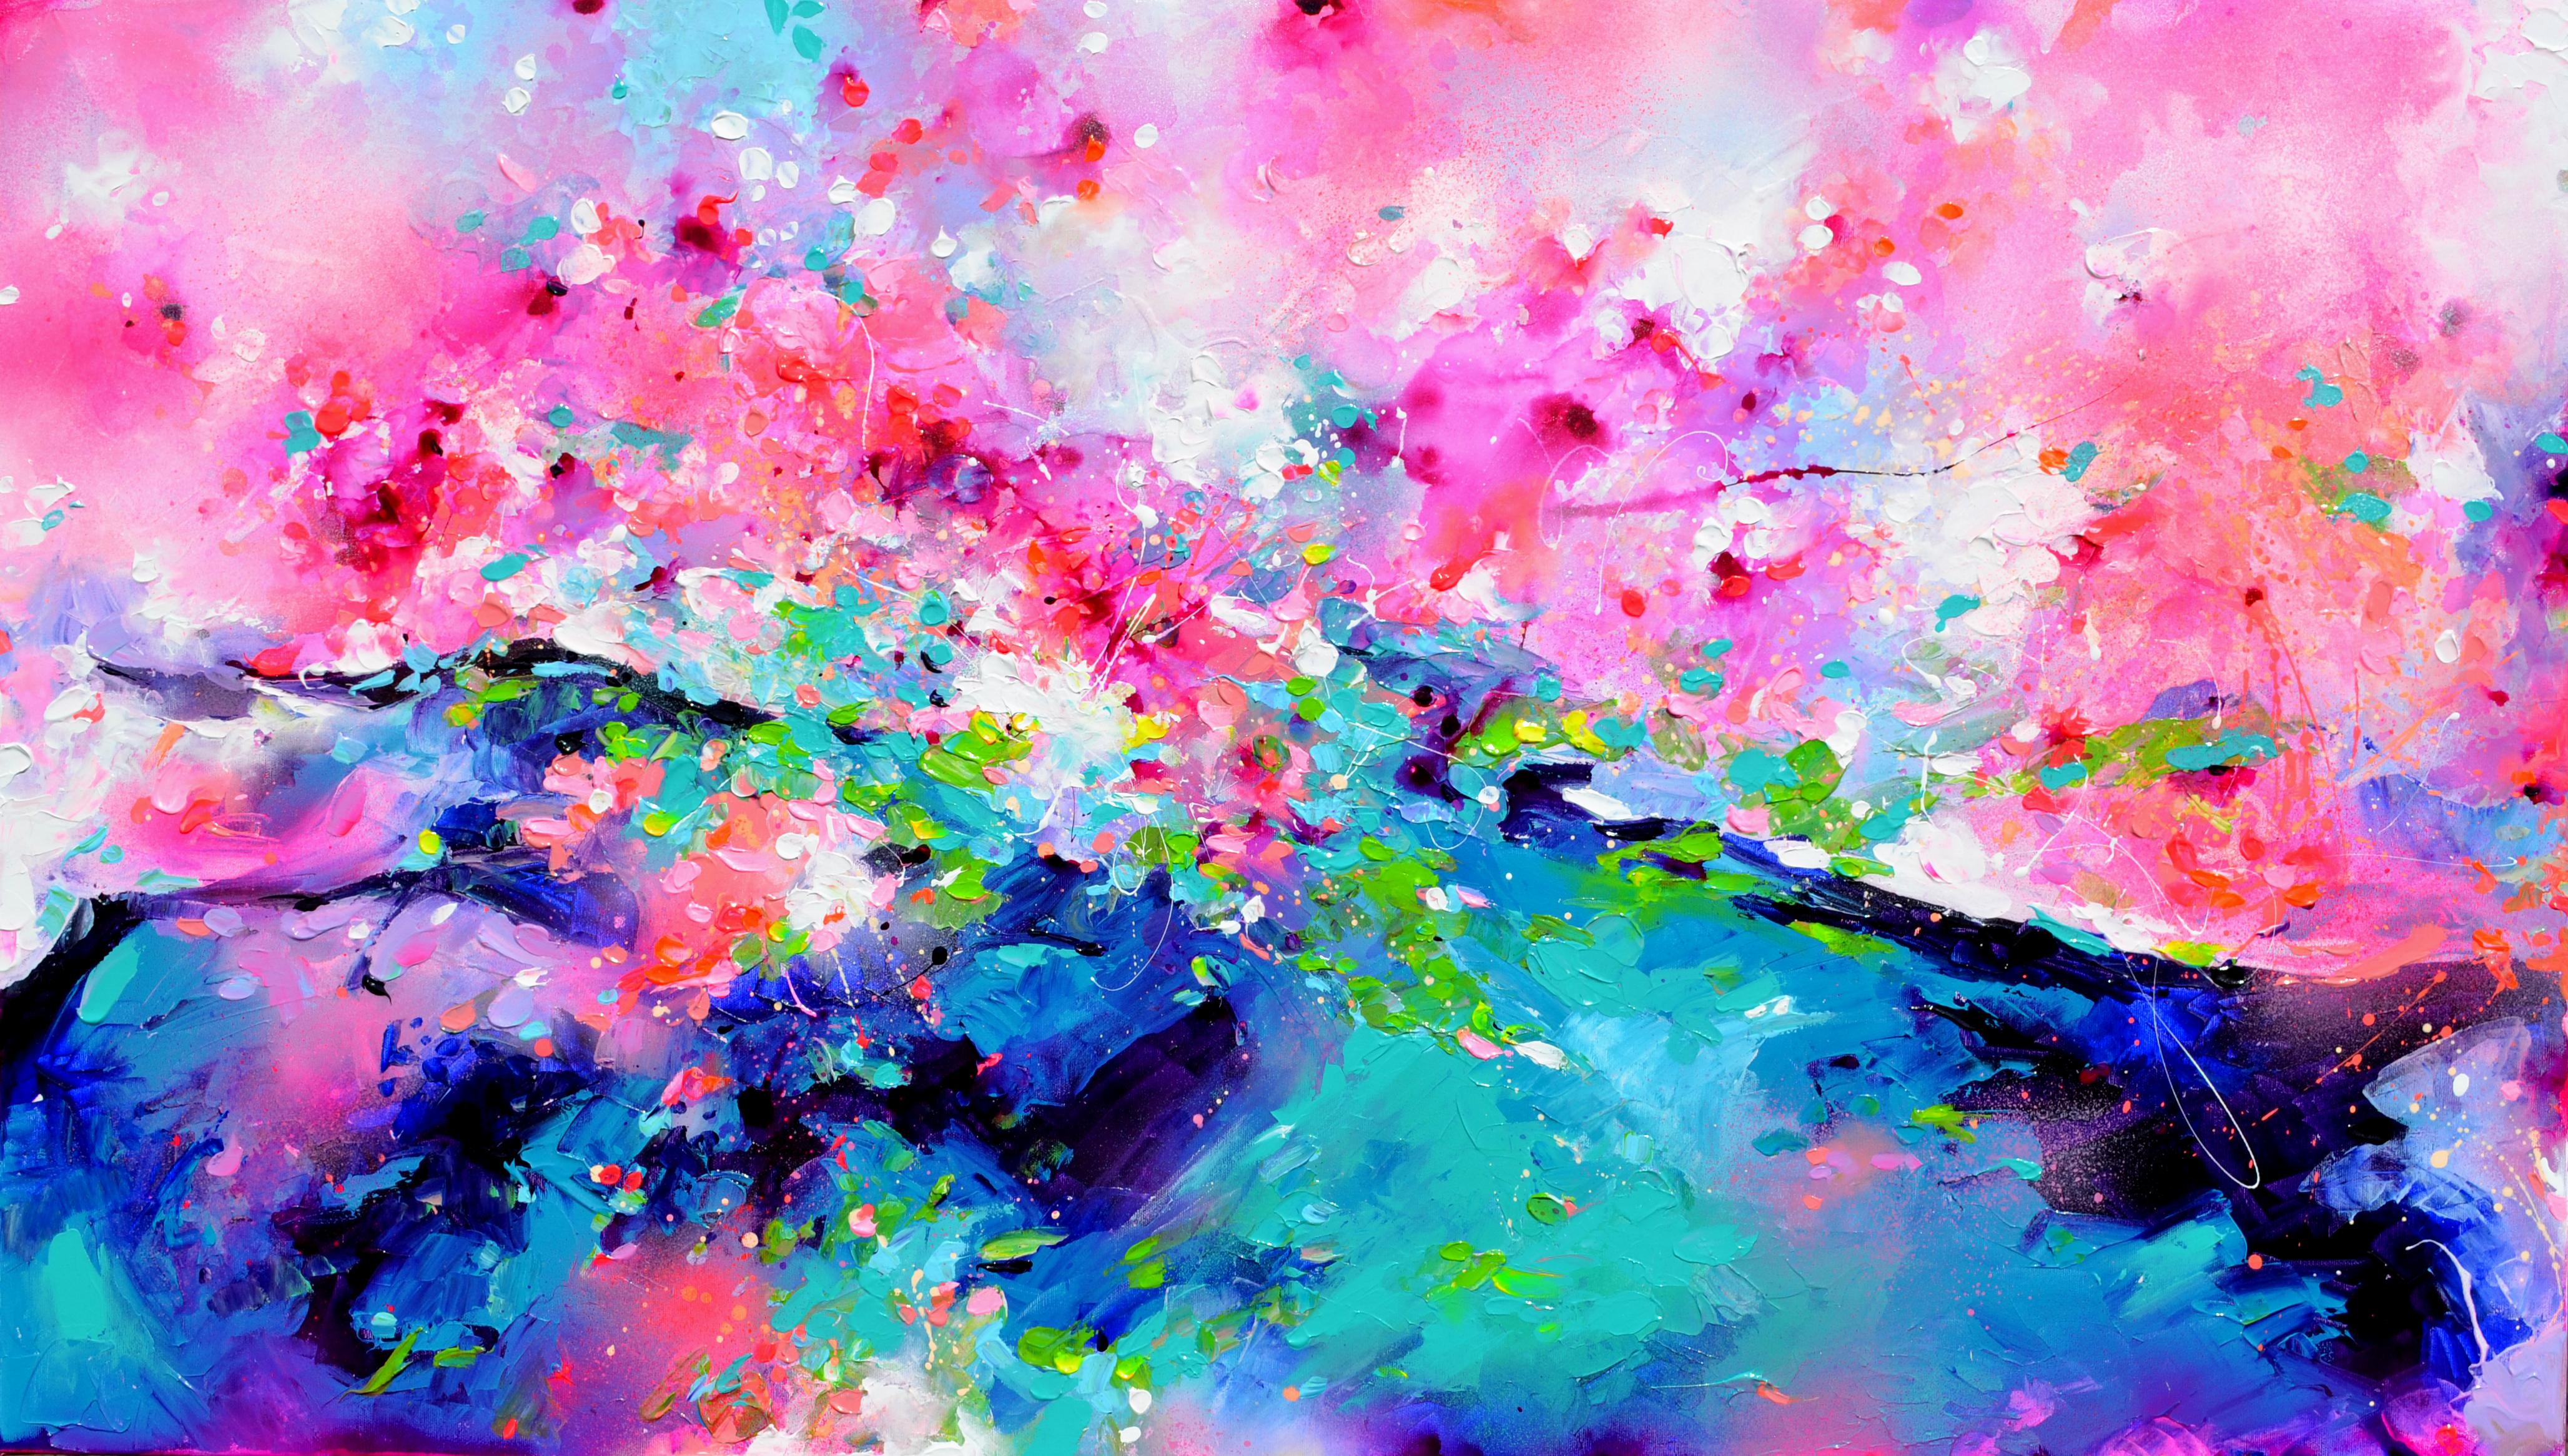 Fresh Moods 91 - Large Abstract Purple Pink and Blue Painting